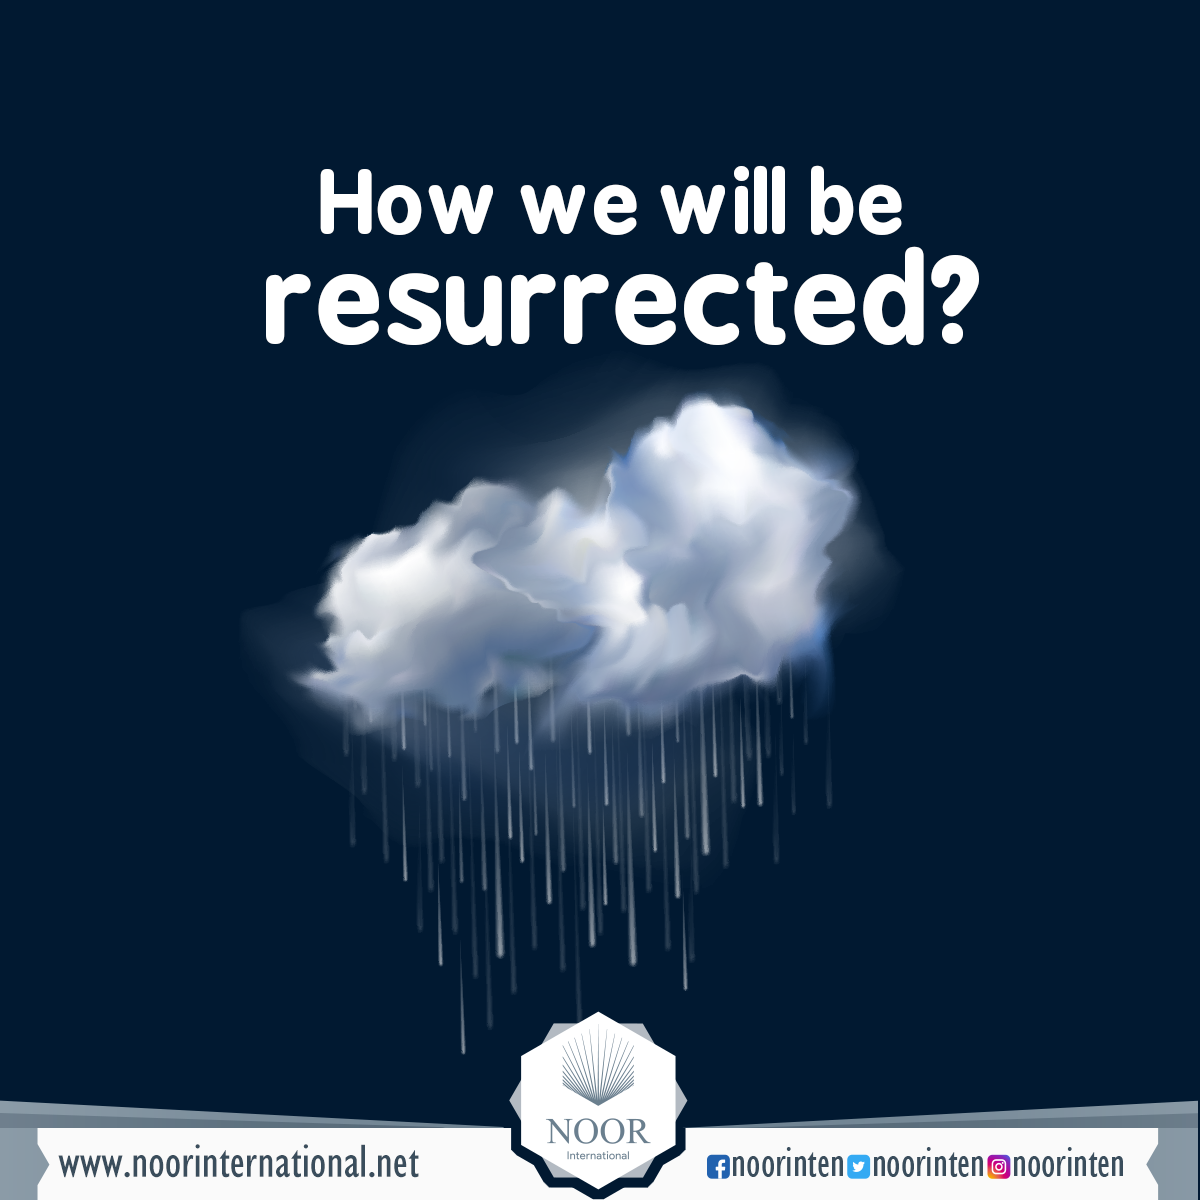 How we will be resurrected?